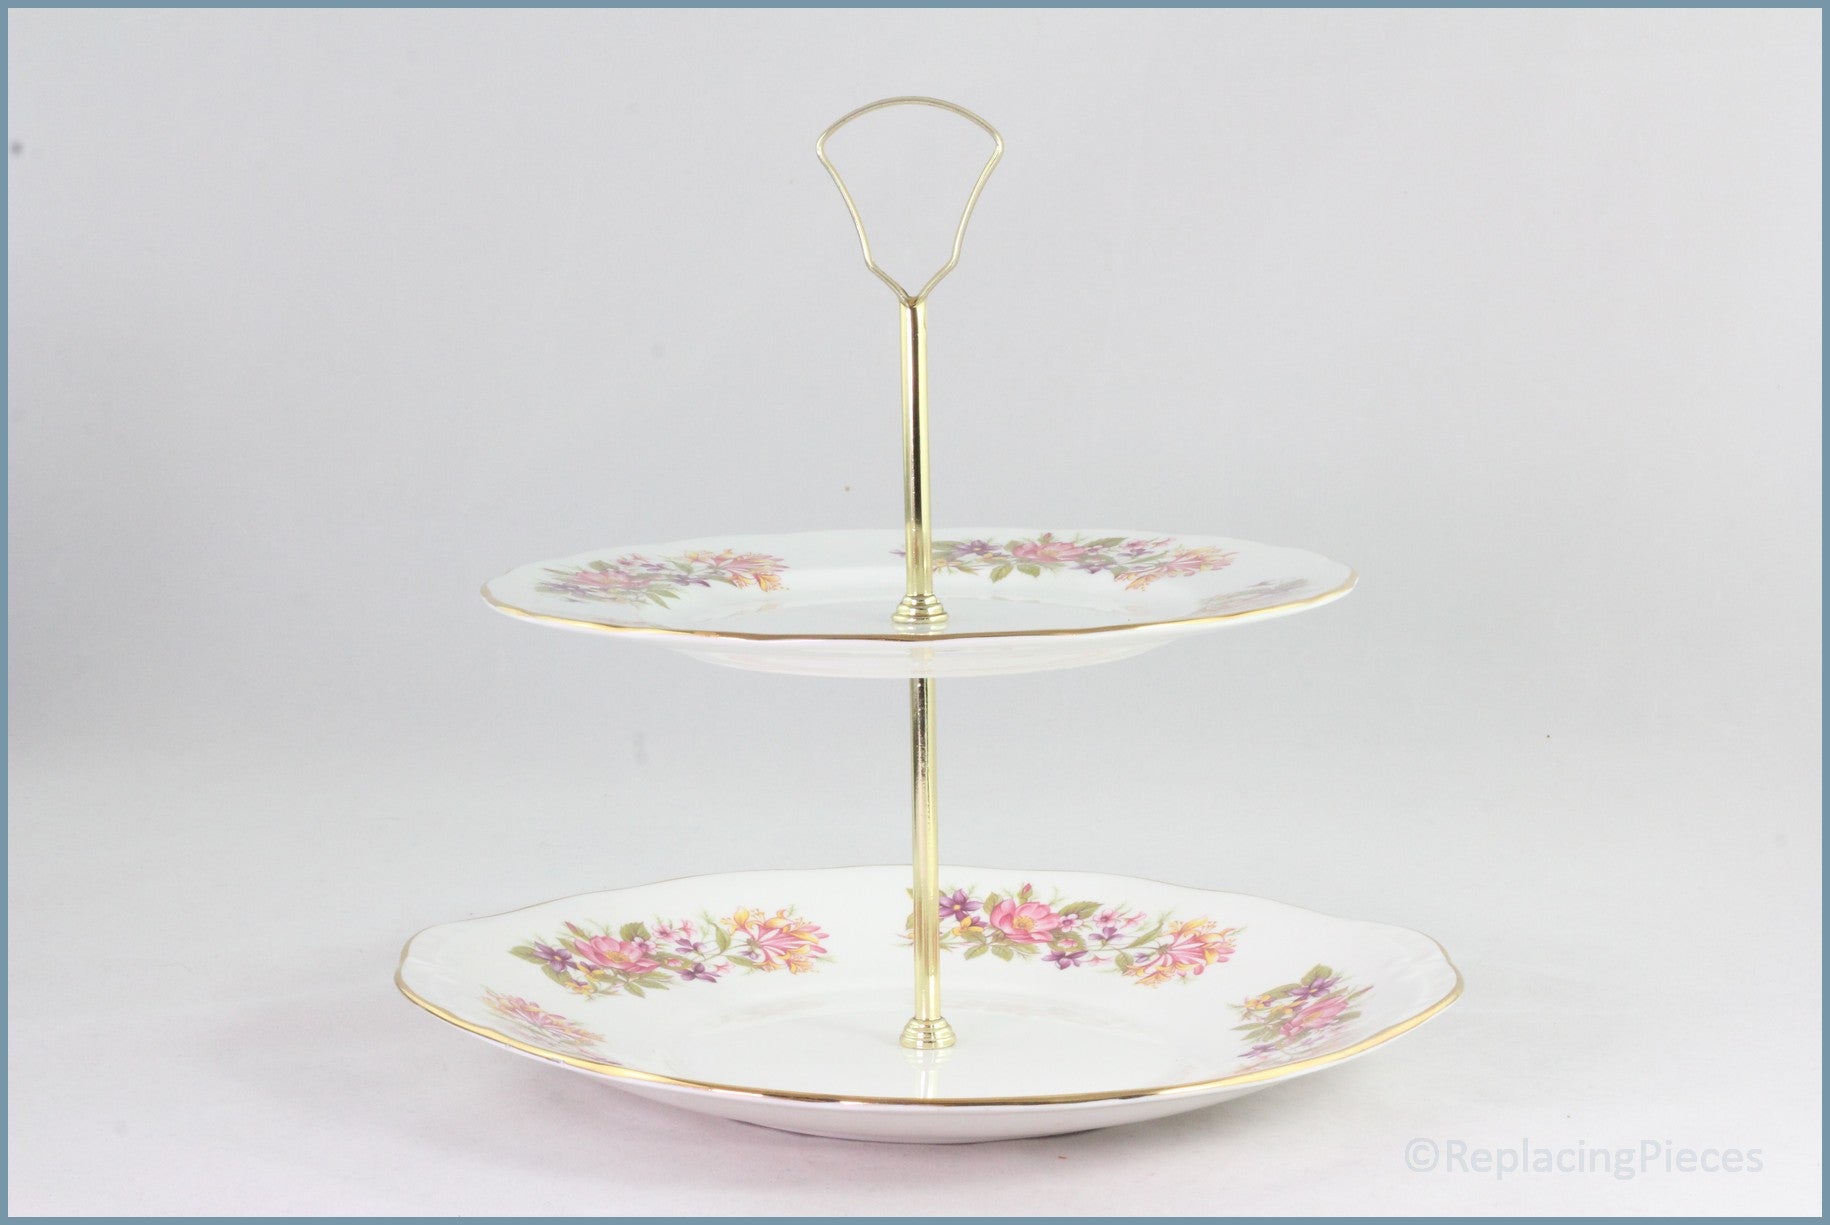 Colclough - Wayside (8581) - 2 Tier Cake Stand